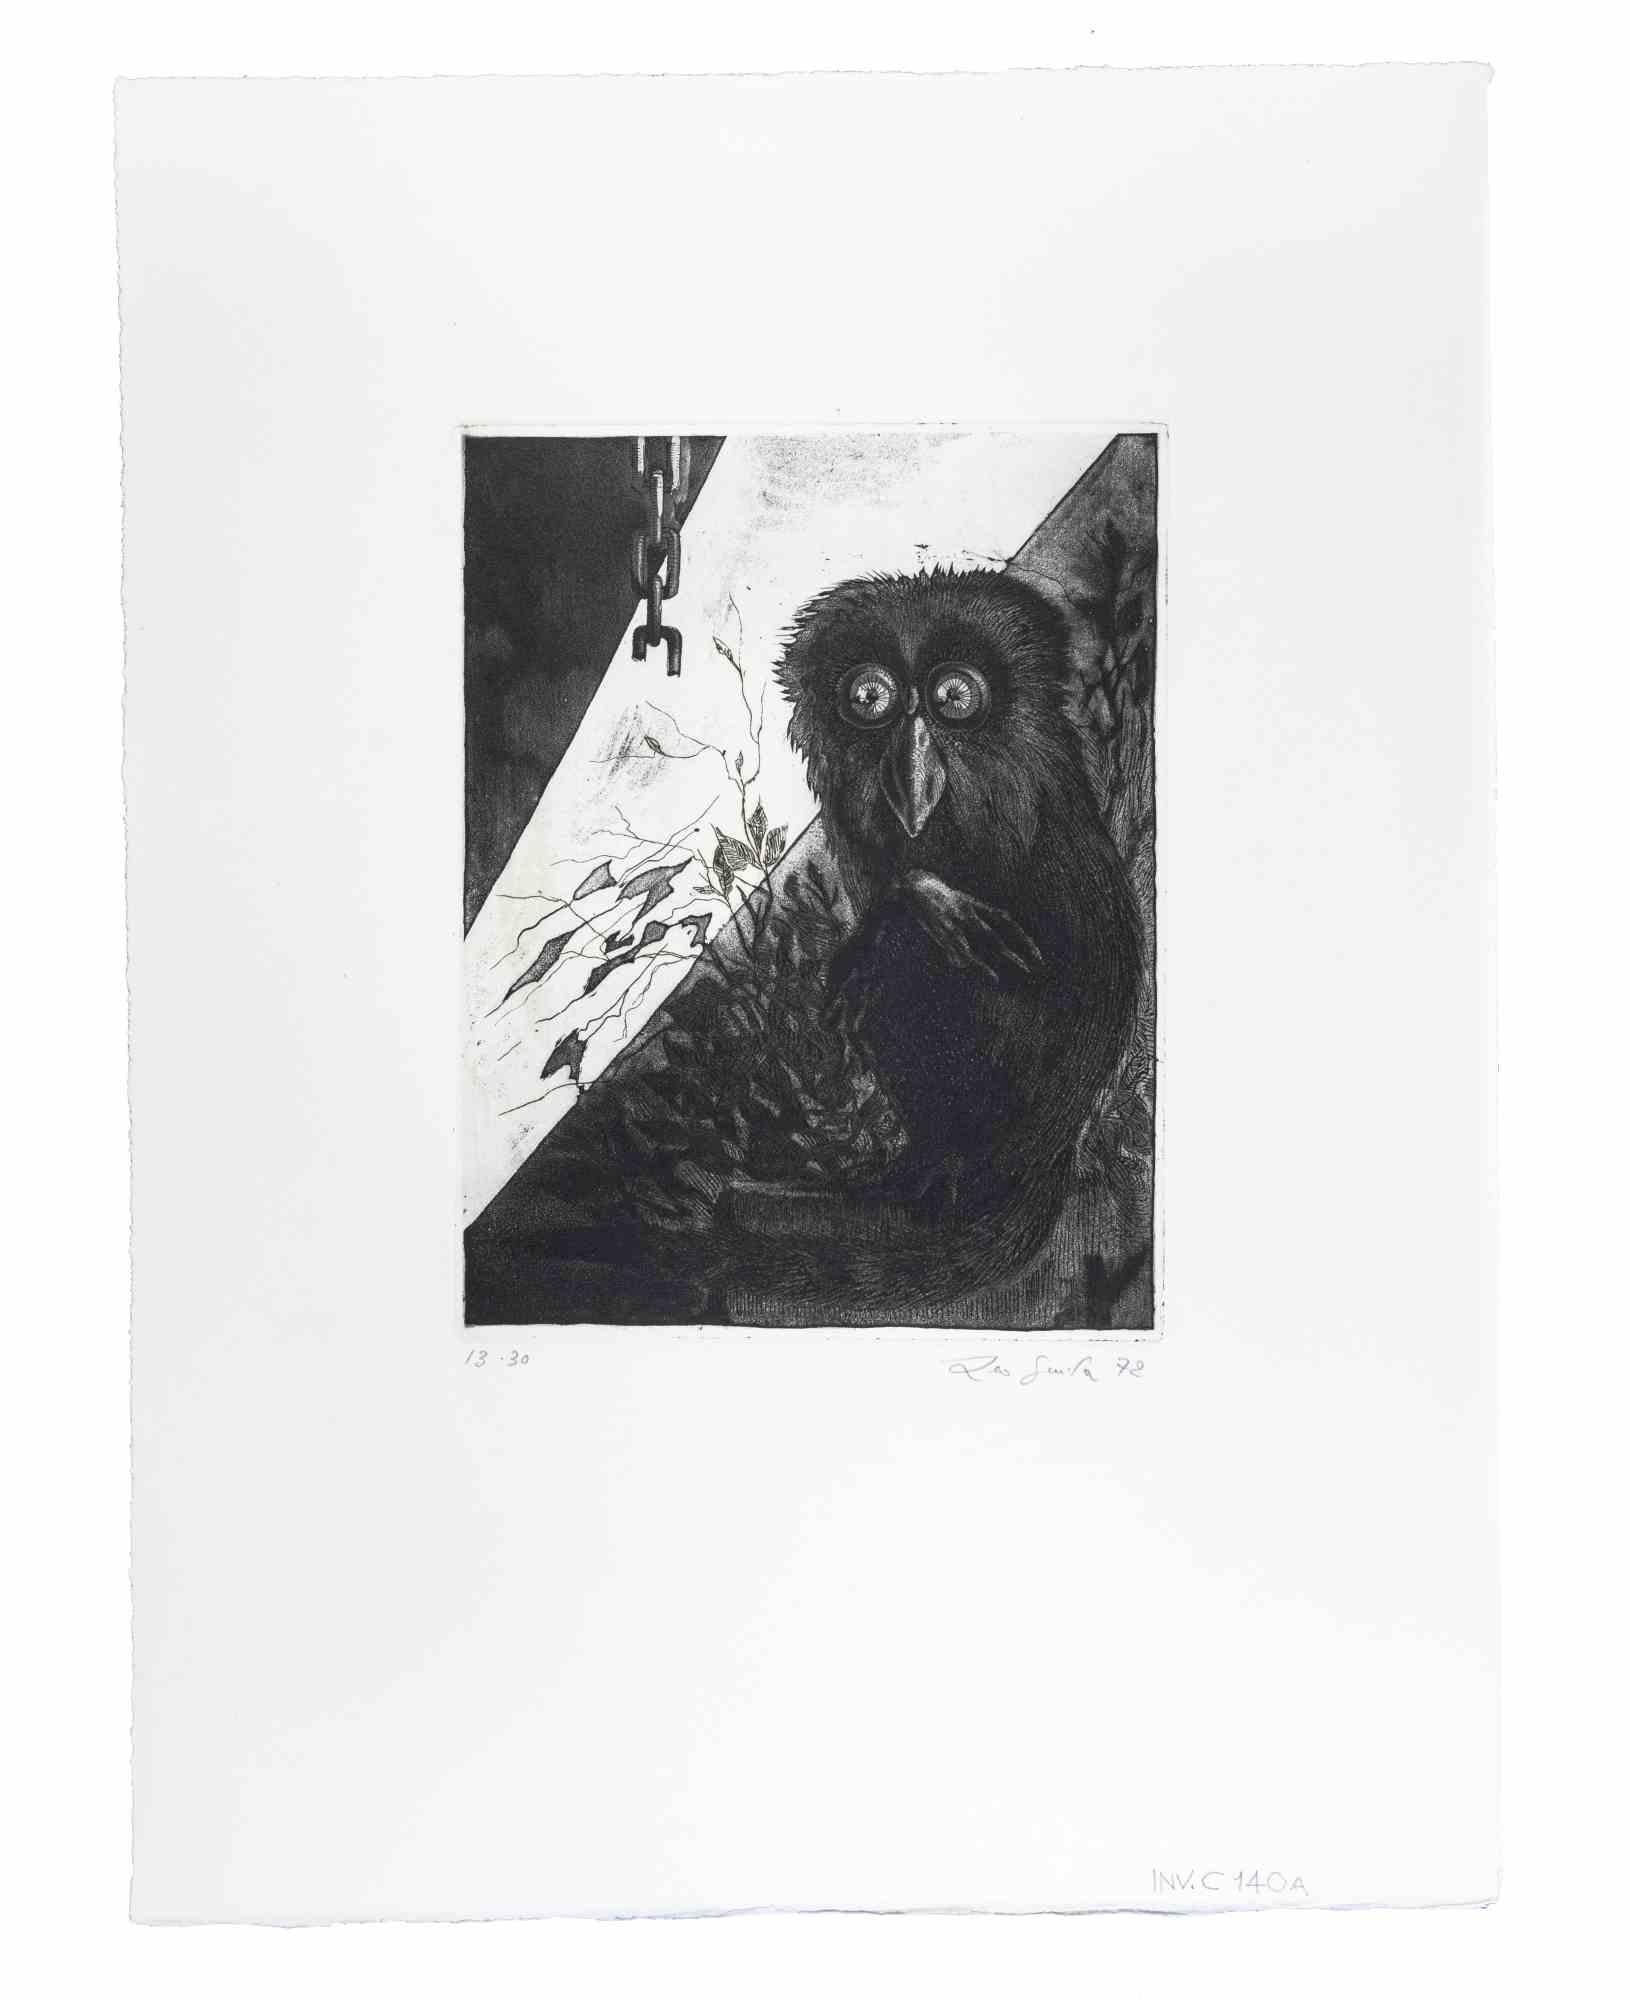 Dark Lemur is an Etching realized by Leo Guida in 1972s.

Good condition, Hand signed, dated with pencil.

Artist sensitive to current issues, artistic movements and historical techniques, Leo Guida has been able to weave a productive interview on